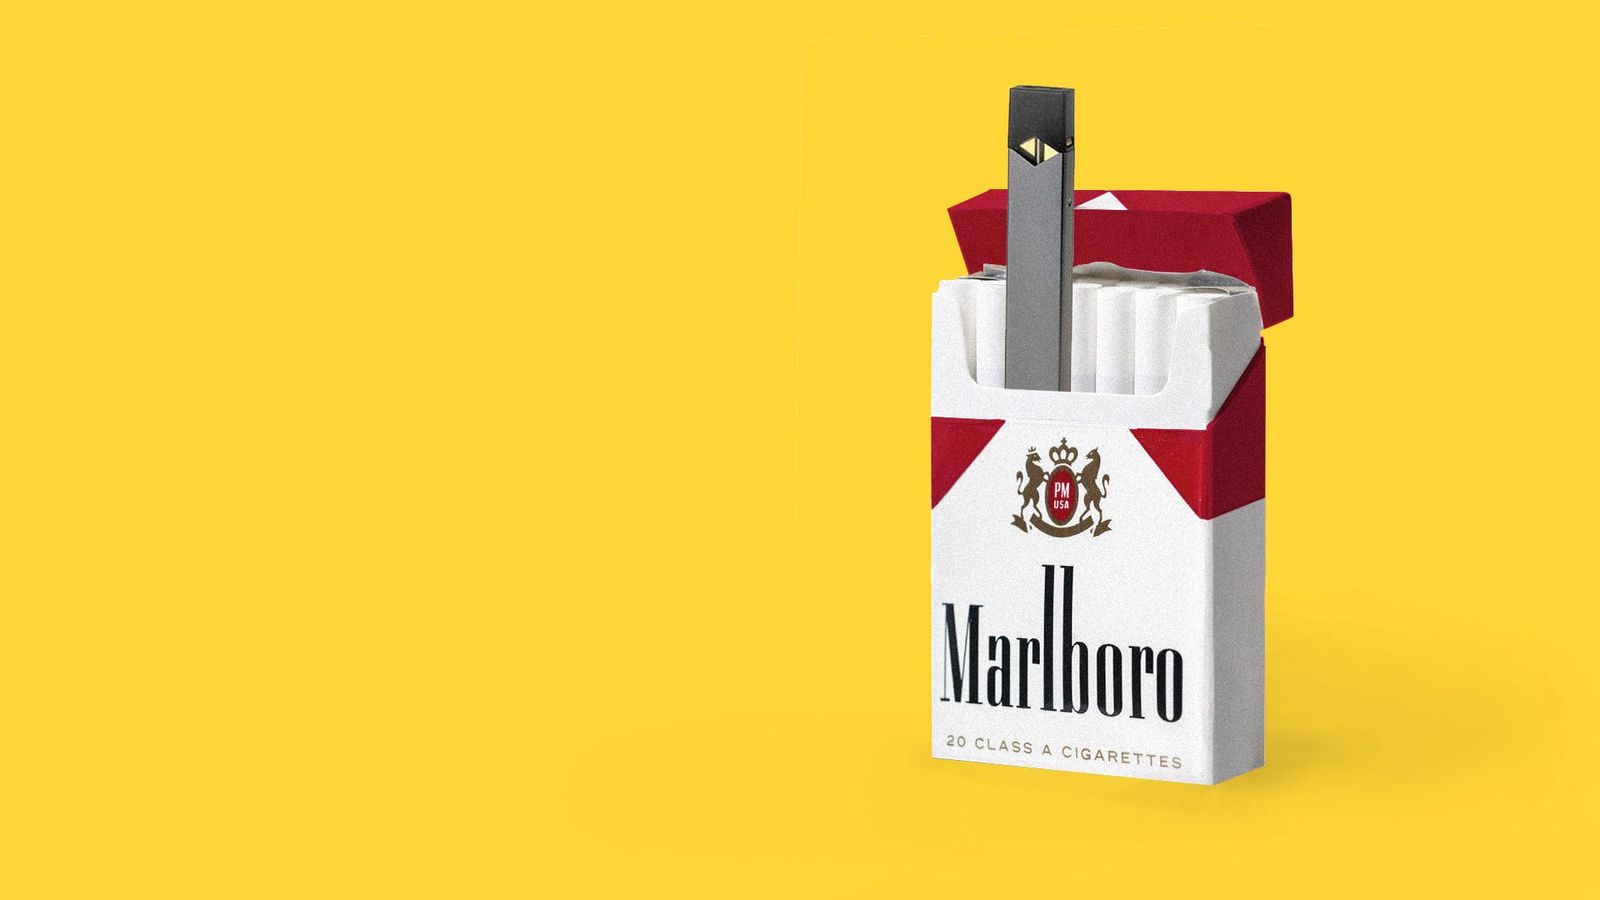 Aspirational' Brand Marlboro Expands Lineup To Counter Ciggie Downtrading  05/03/2023